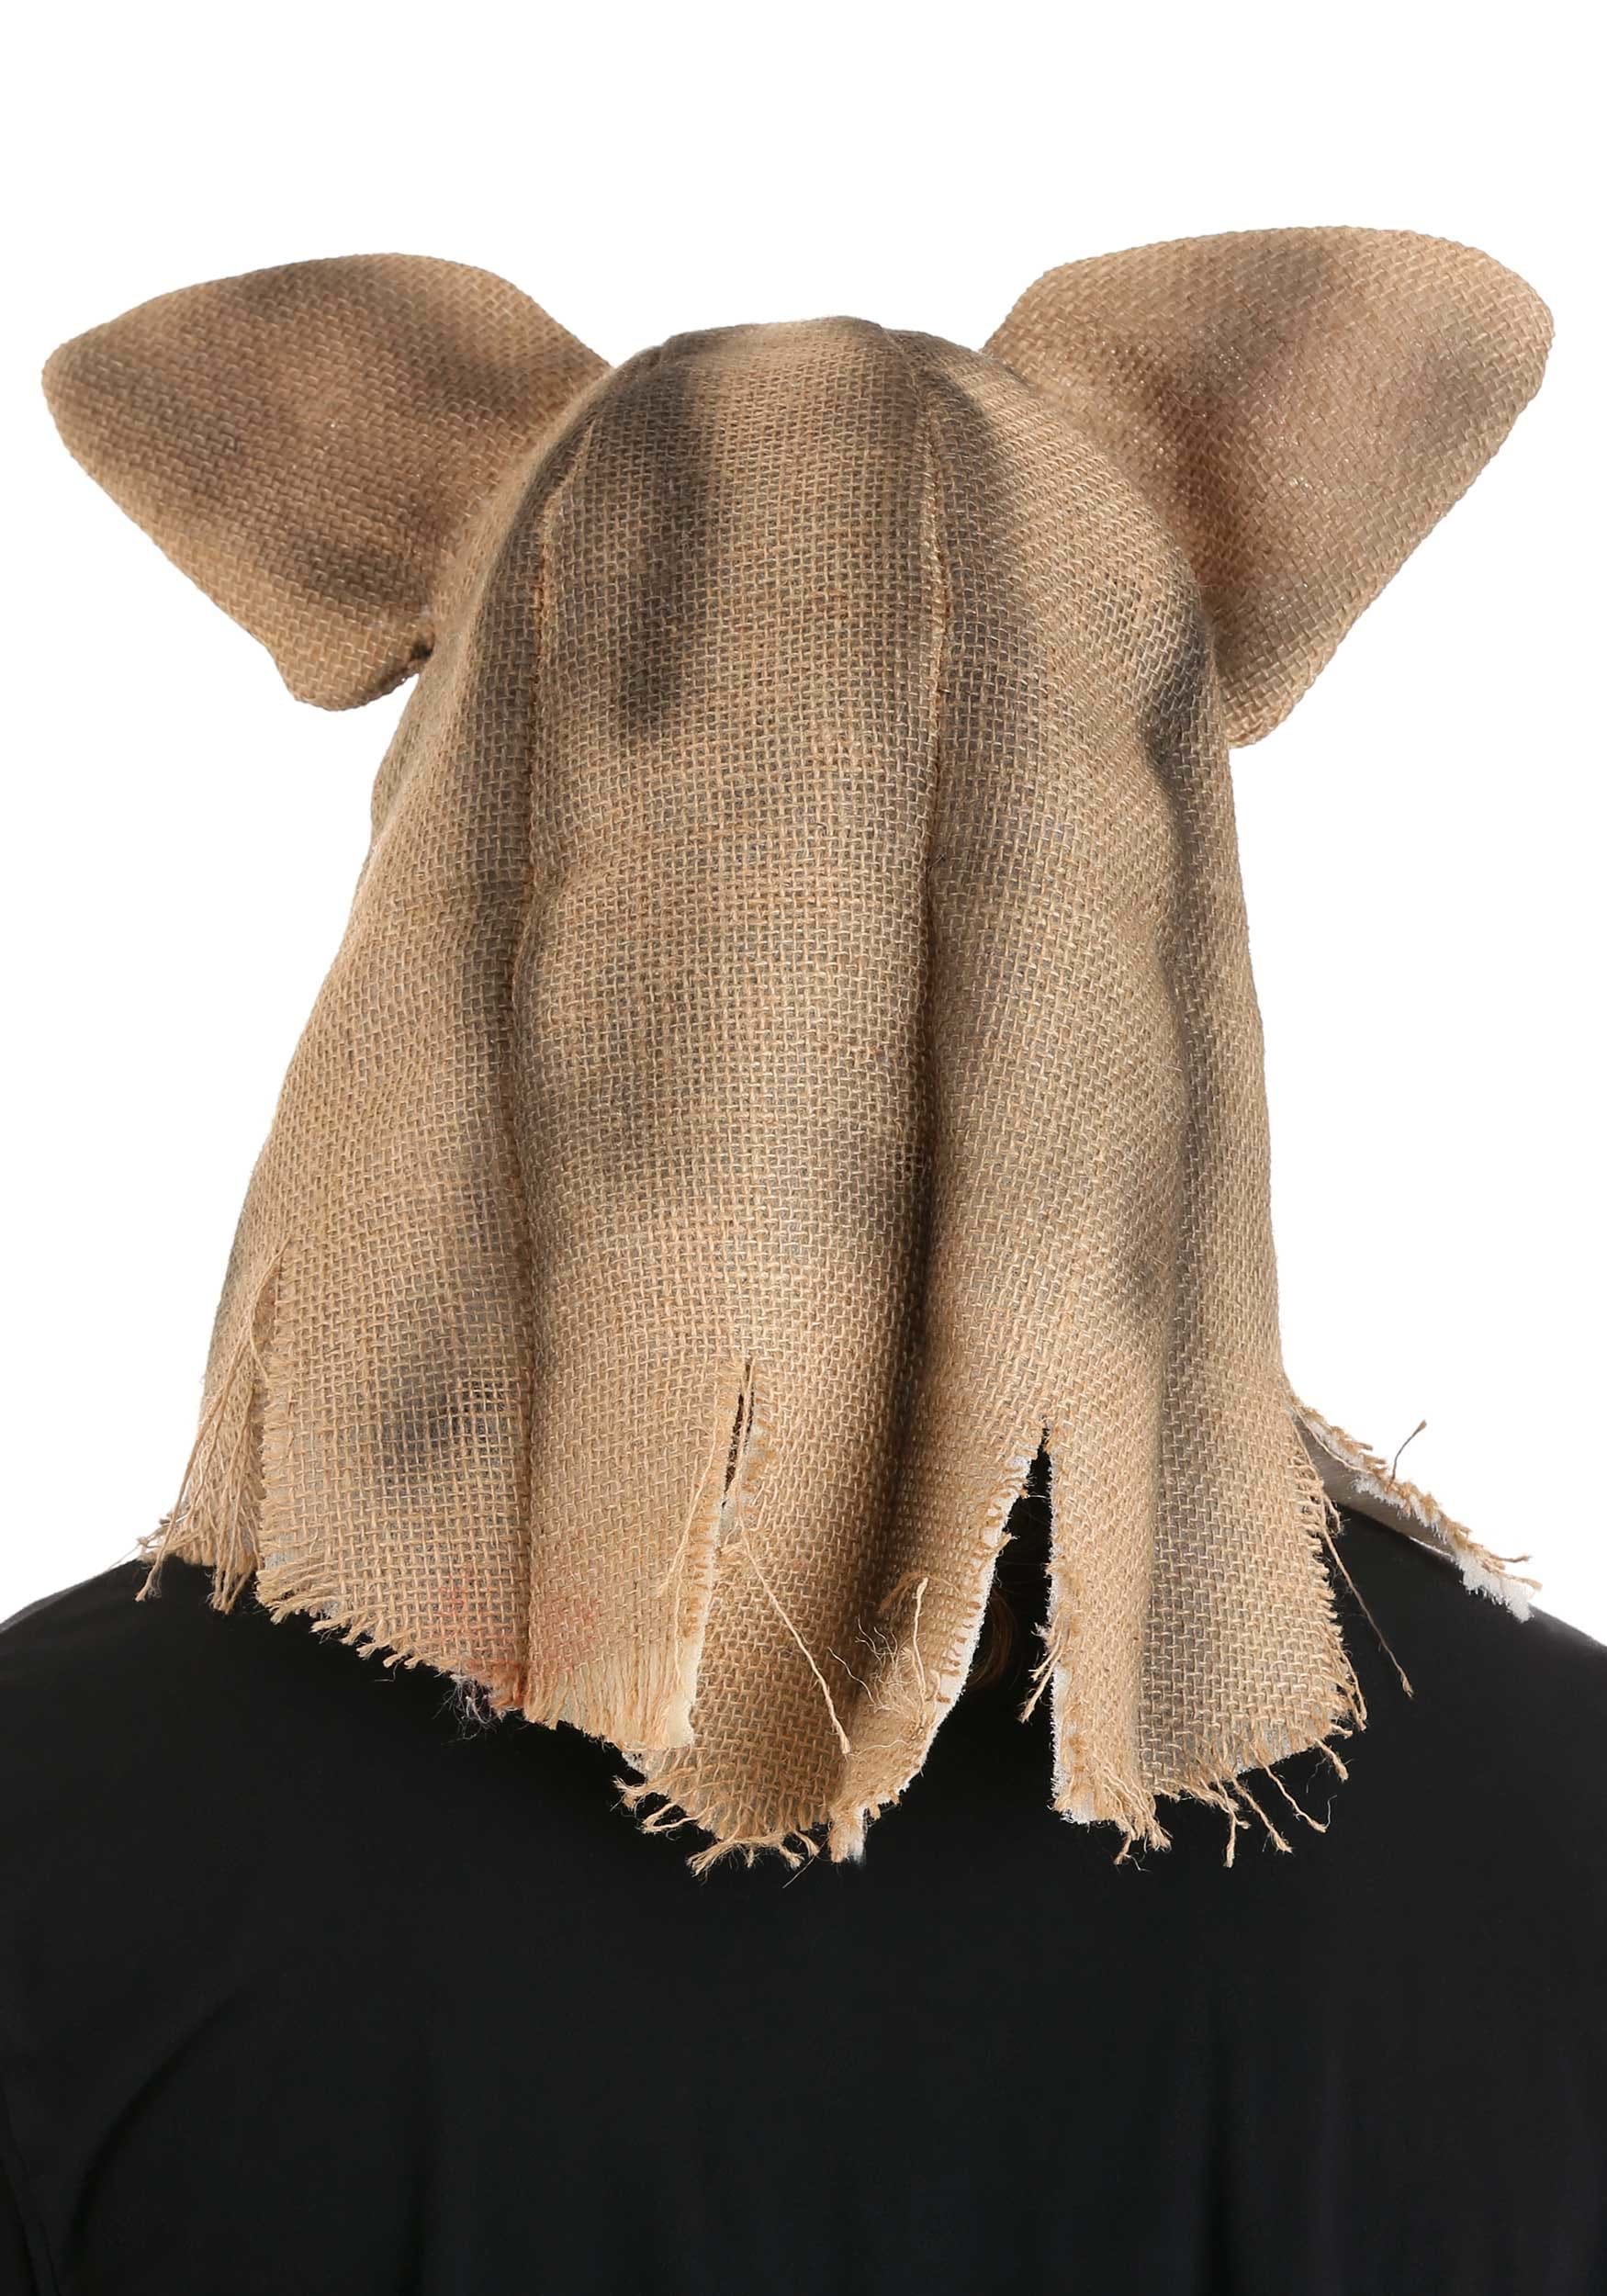 Pig Scarecrow Mouth Mover Adult Mask